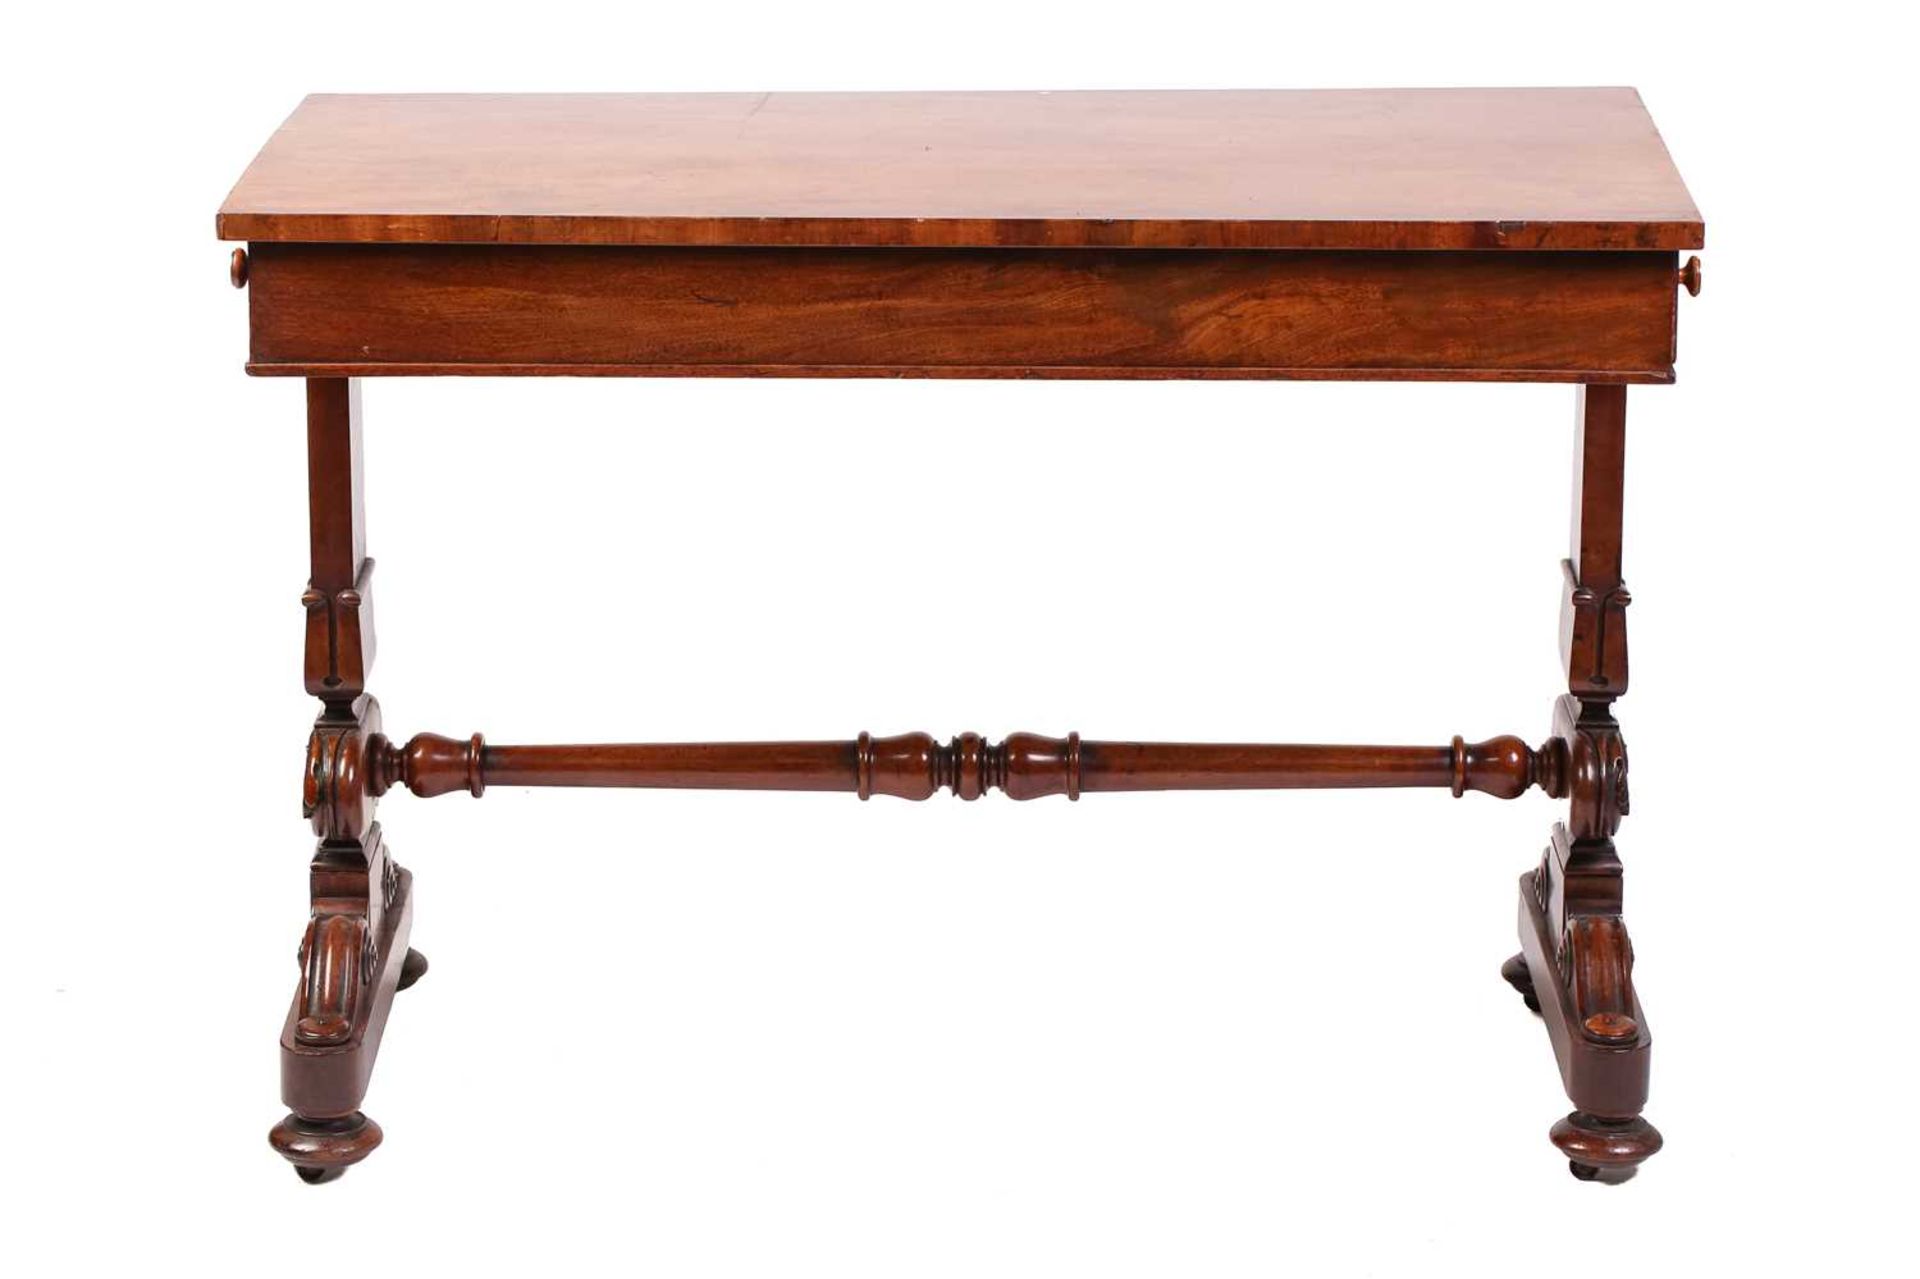 An early Victorian mahogany rectangular side table with unusually configured end frieze drawers on - Image 2 of 8